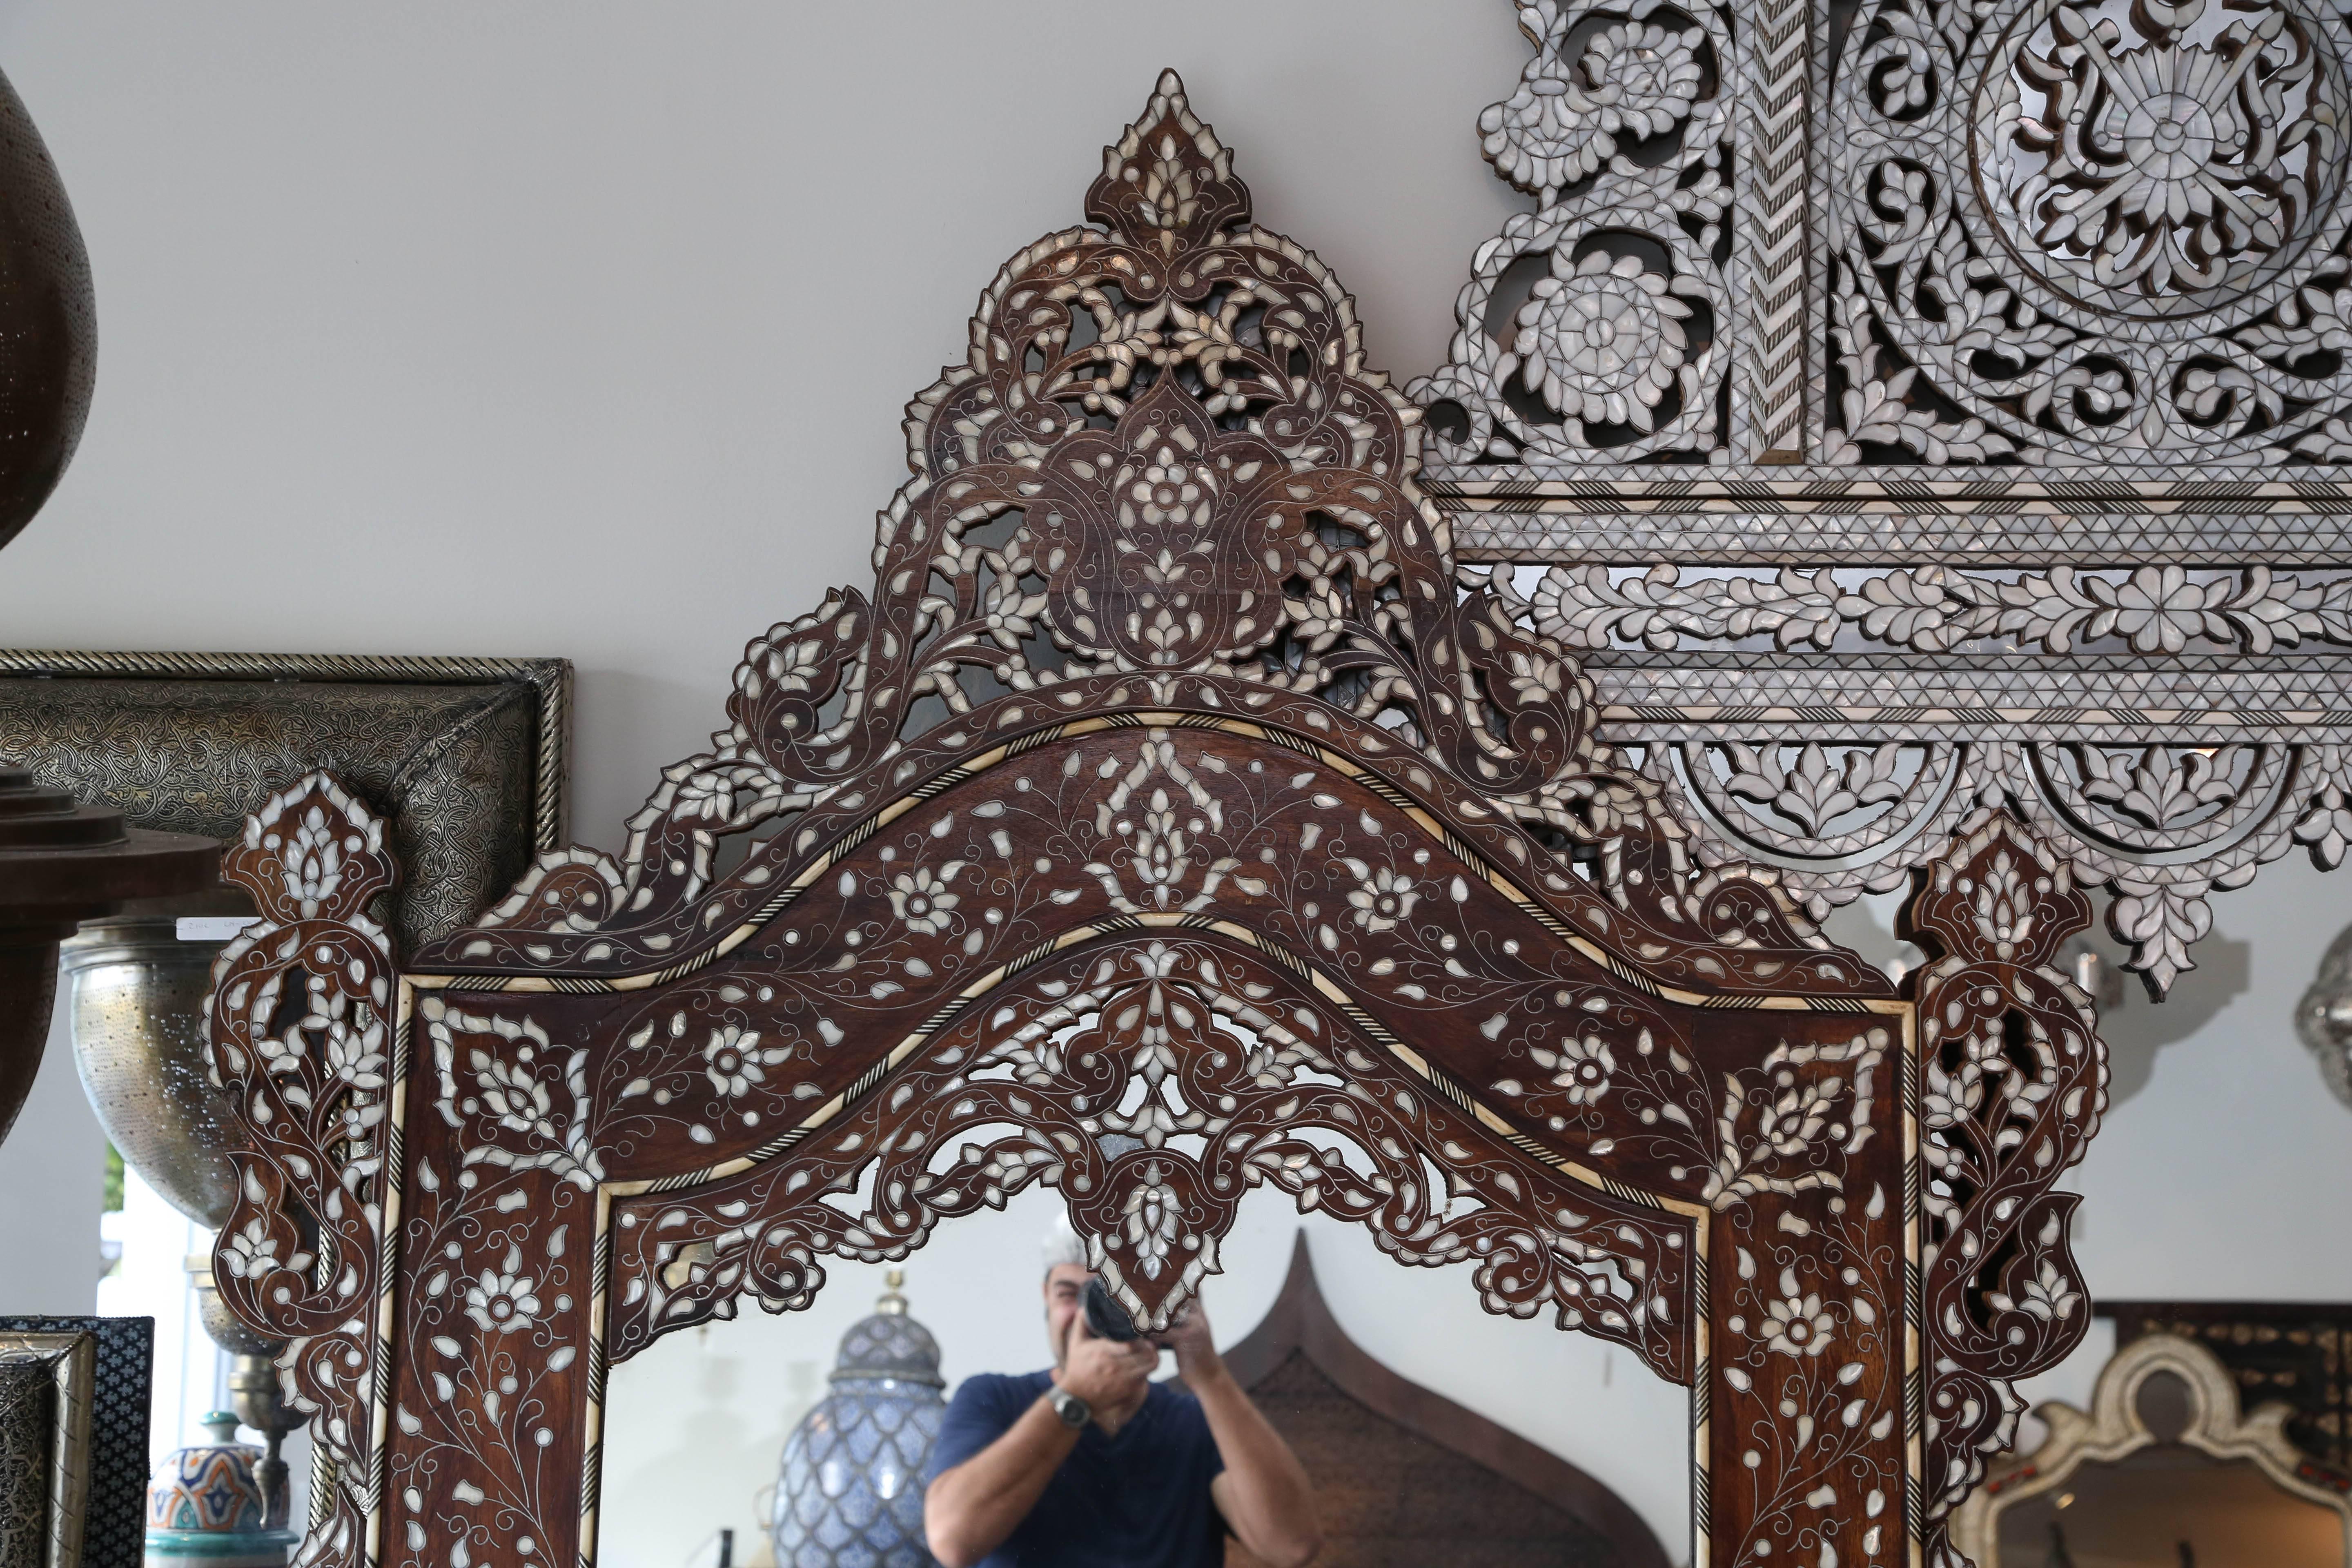 Handmade, circa 1900 antique Syrian mirror inlaid with mother-of-pearl and camel bone
 
Gorgeous walnut mirror with detachable arched top, intricately inlaid with mother-of-pearl. Delicate scroll design highlighted by thousands of pieces of